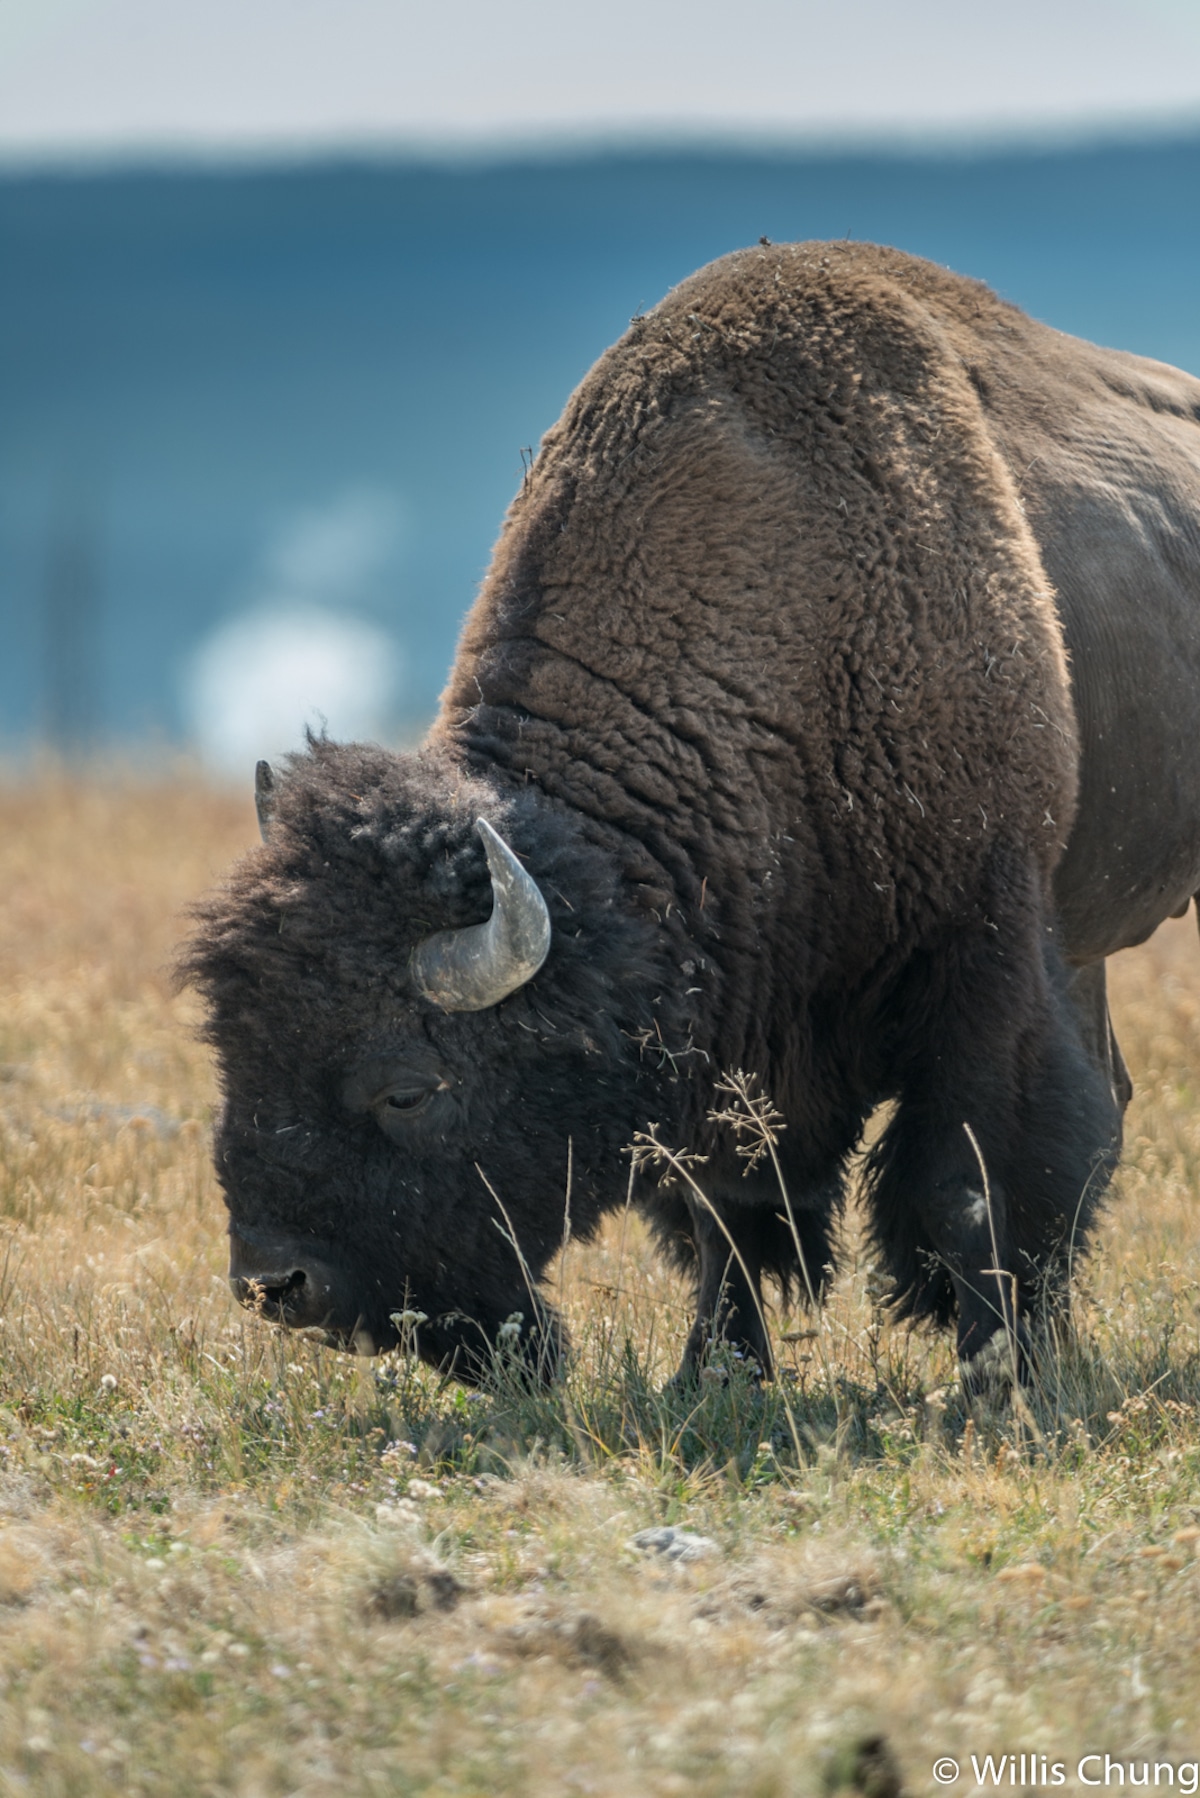 Bison Photo by Willis Chung